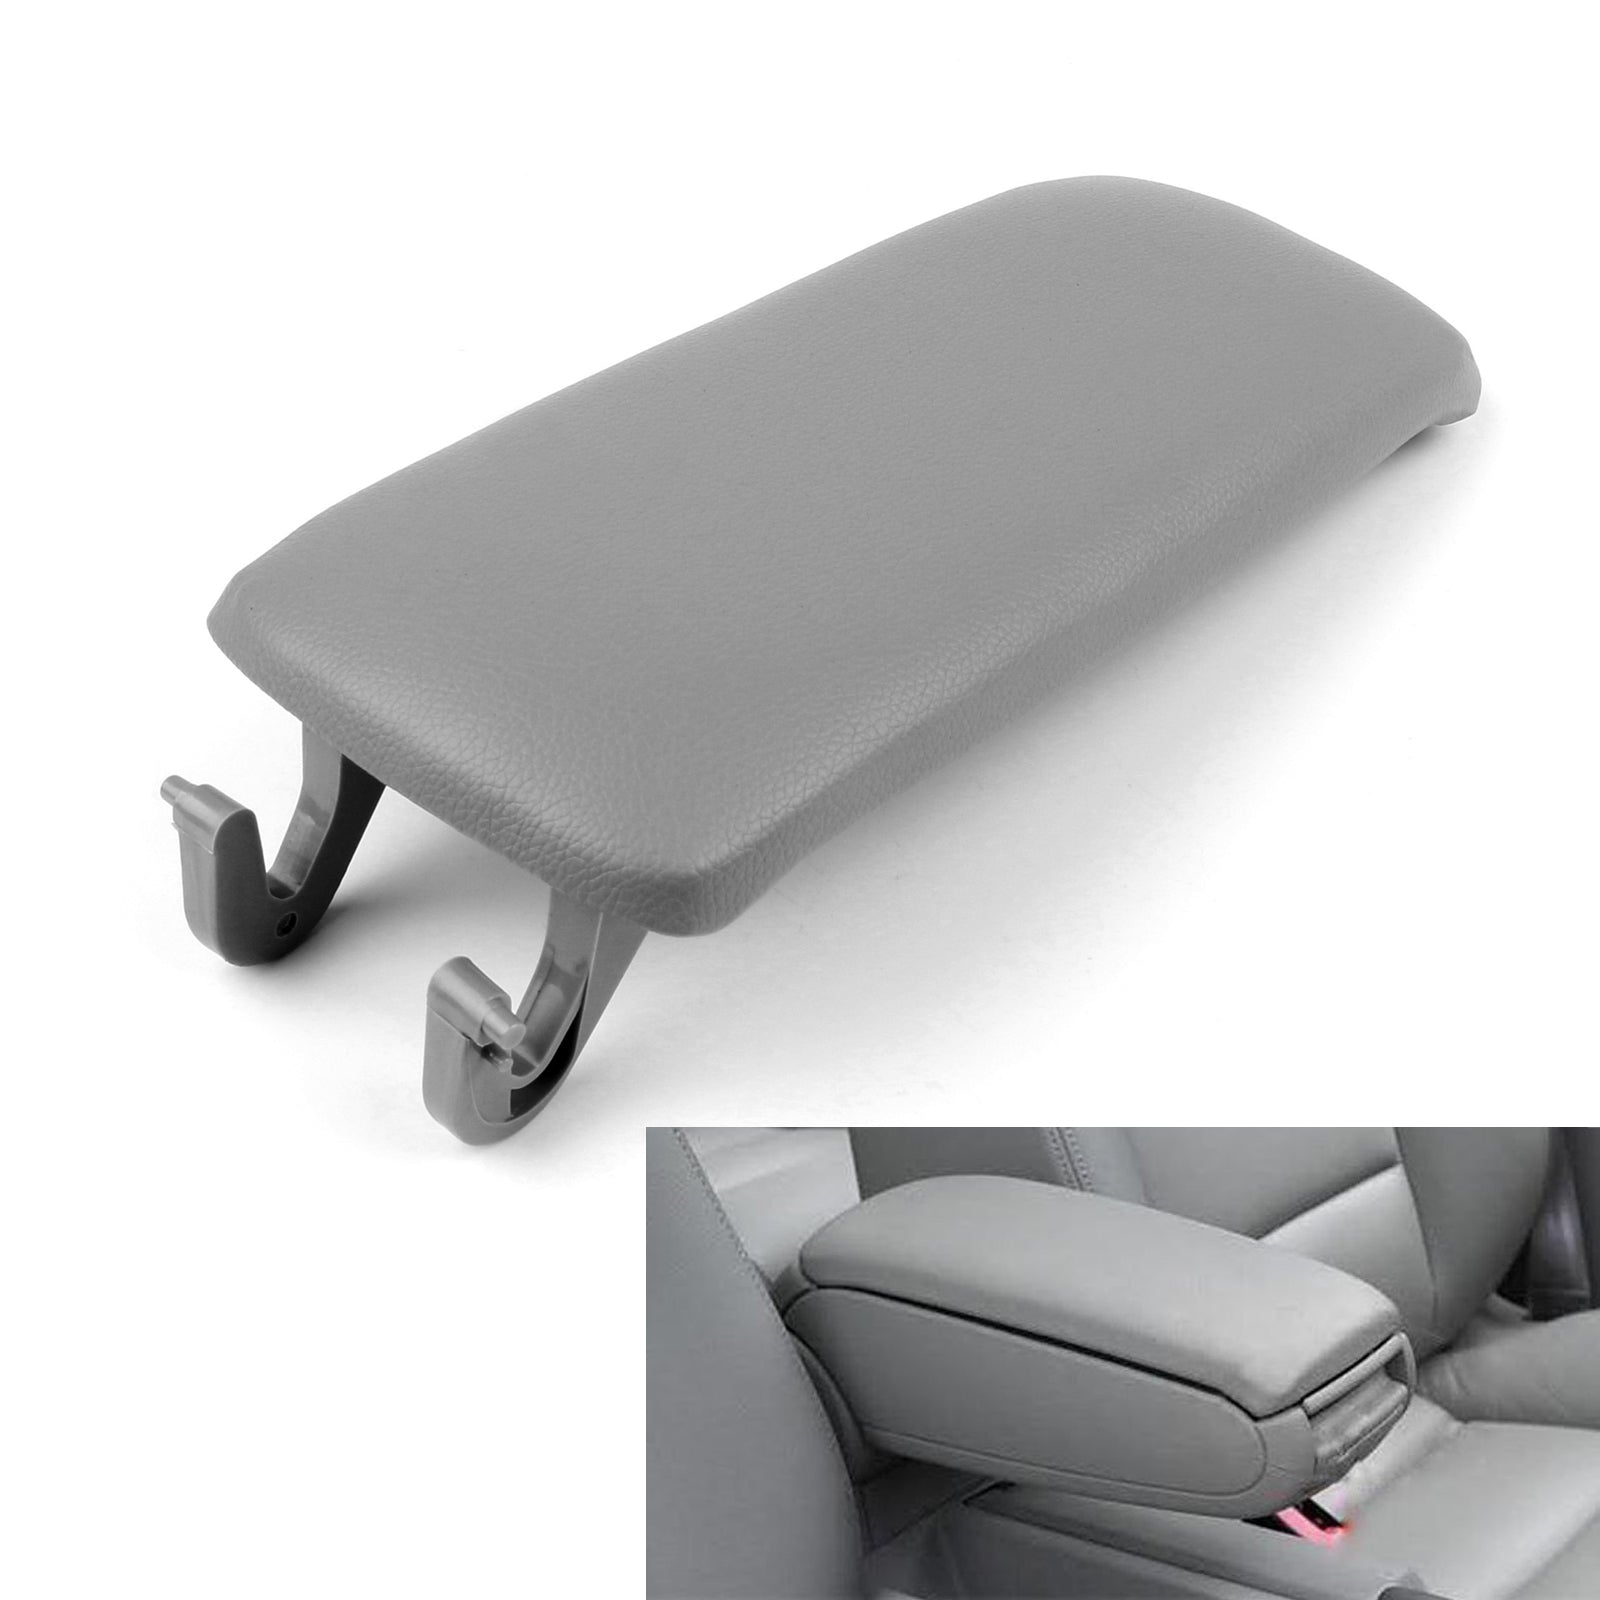 PU Leather Center Console Armrest Cover Lid For Audi A4 S4 A6 2000-2008 Gray